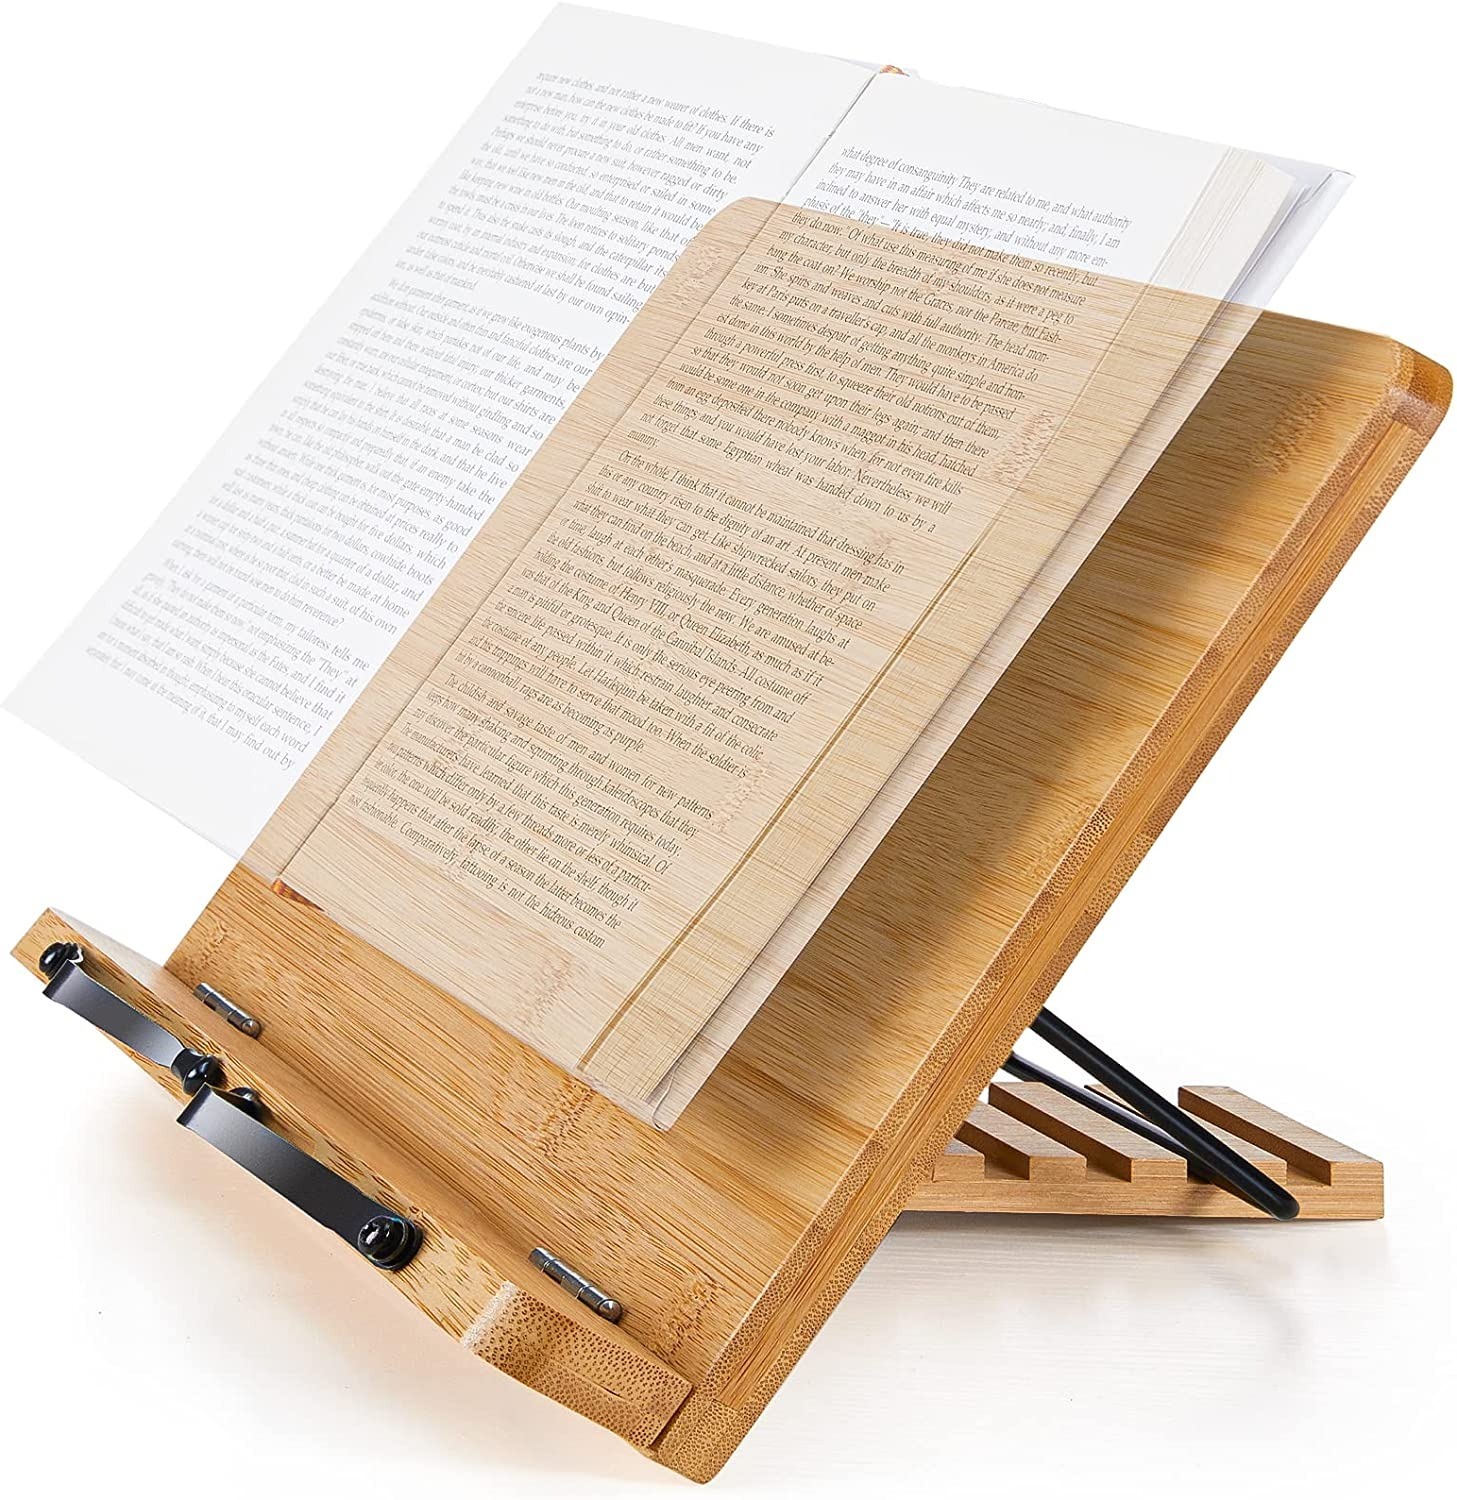 13.4" x 9.5" Pipishell Large Bamboo Book, Tablet, or Laptop Stand w/ 5 Adjustable Viewing Angles $10.40 + F/S w/ Prime or on Orders $25+